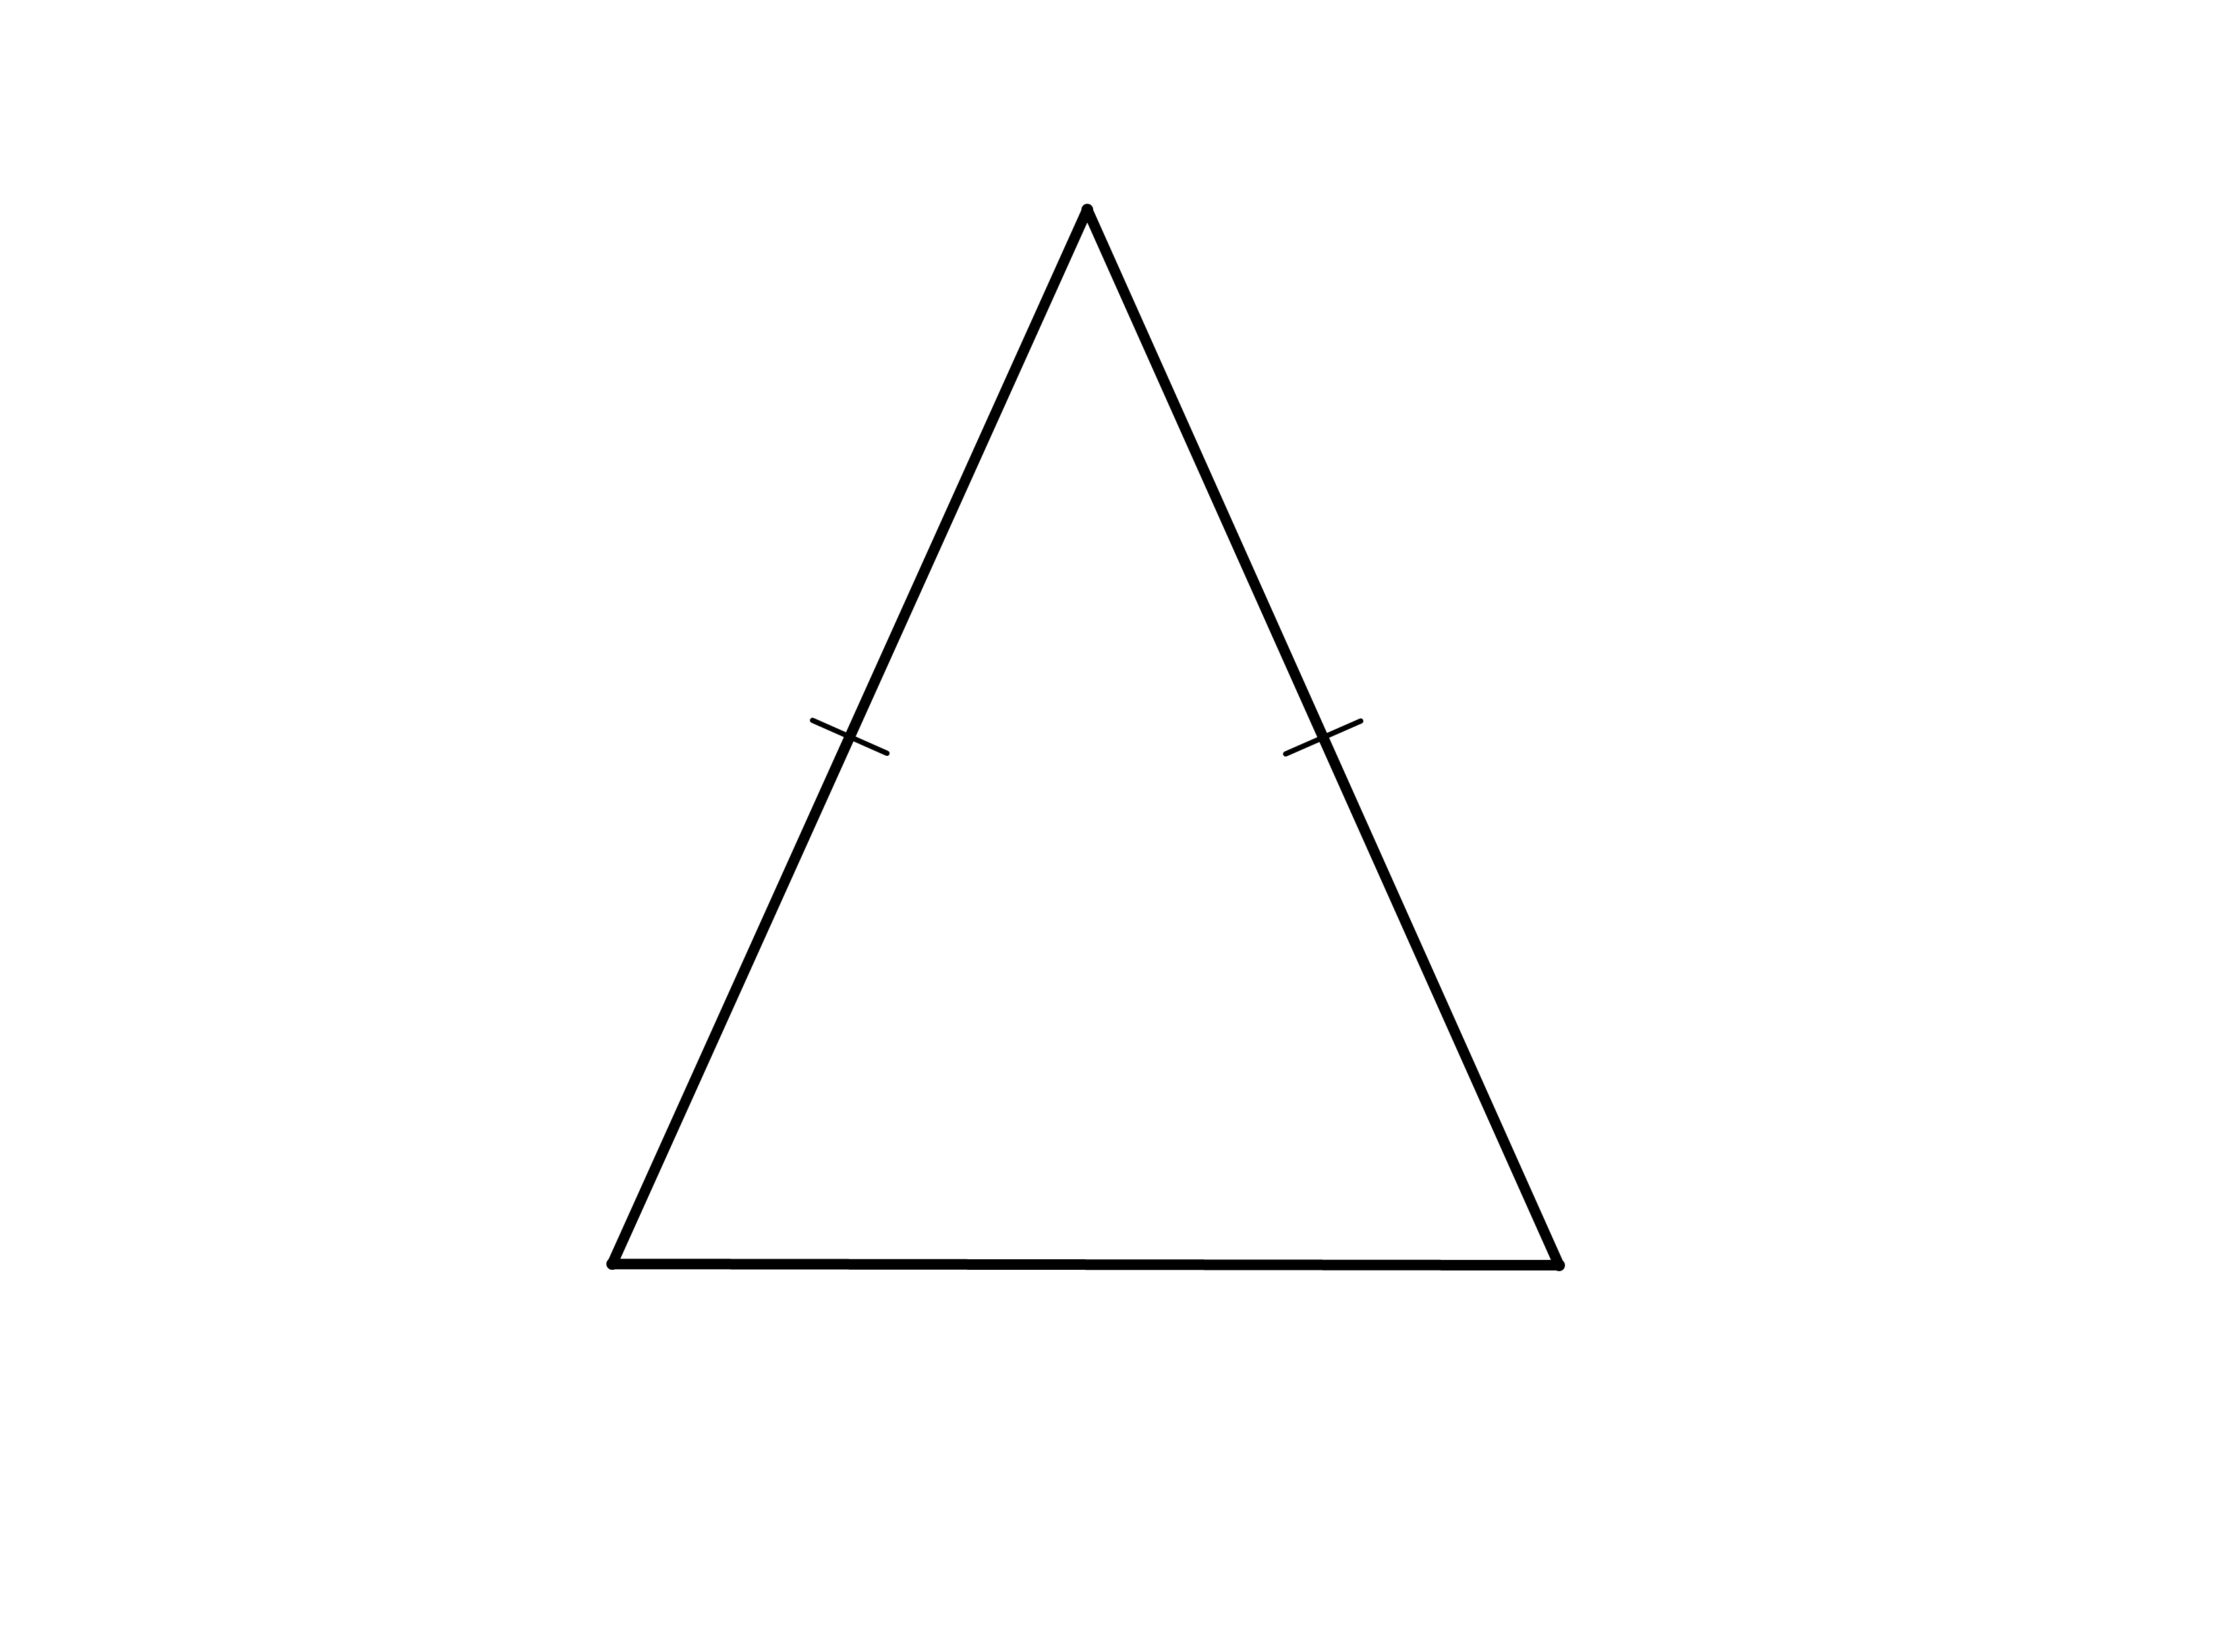 side lengths of isosceles right triangle